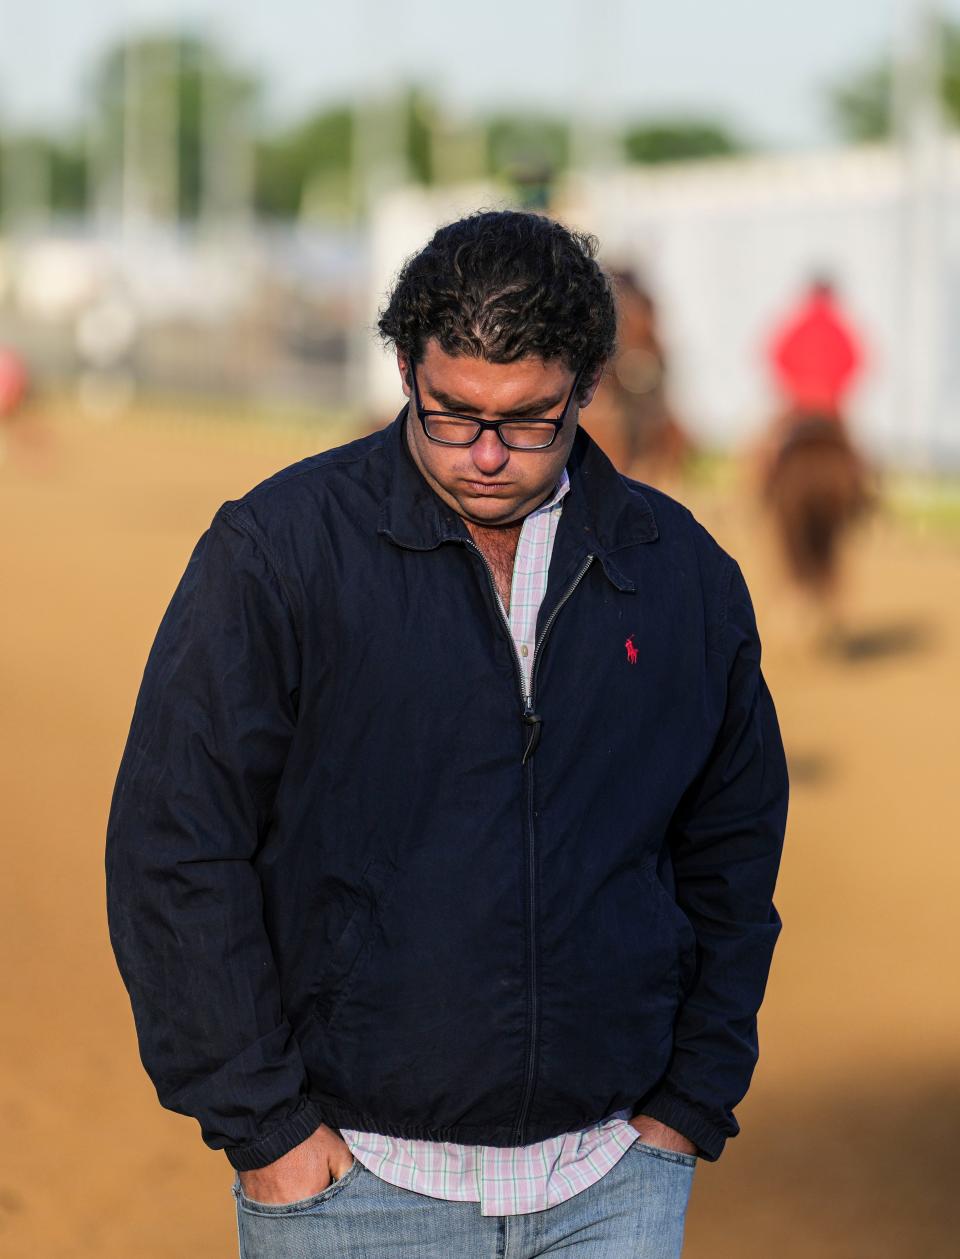 Trainer Saffie Joseph Jr. at Churchill Downs Thursday May 4, 2023, in Louisville, Ky. Joseph has Lord Miles in Saturday's Kentucky Derby. Two of Joseph's horses, Parents Pride and Chasing Artie, have died since Churchill Downs' opening night of Kentucky Derby Week.